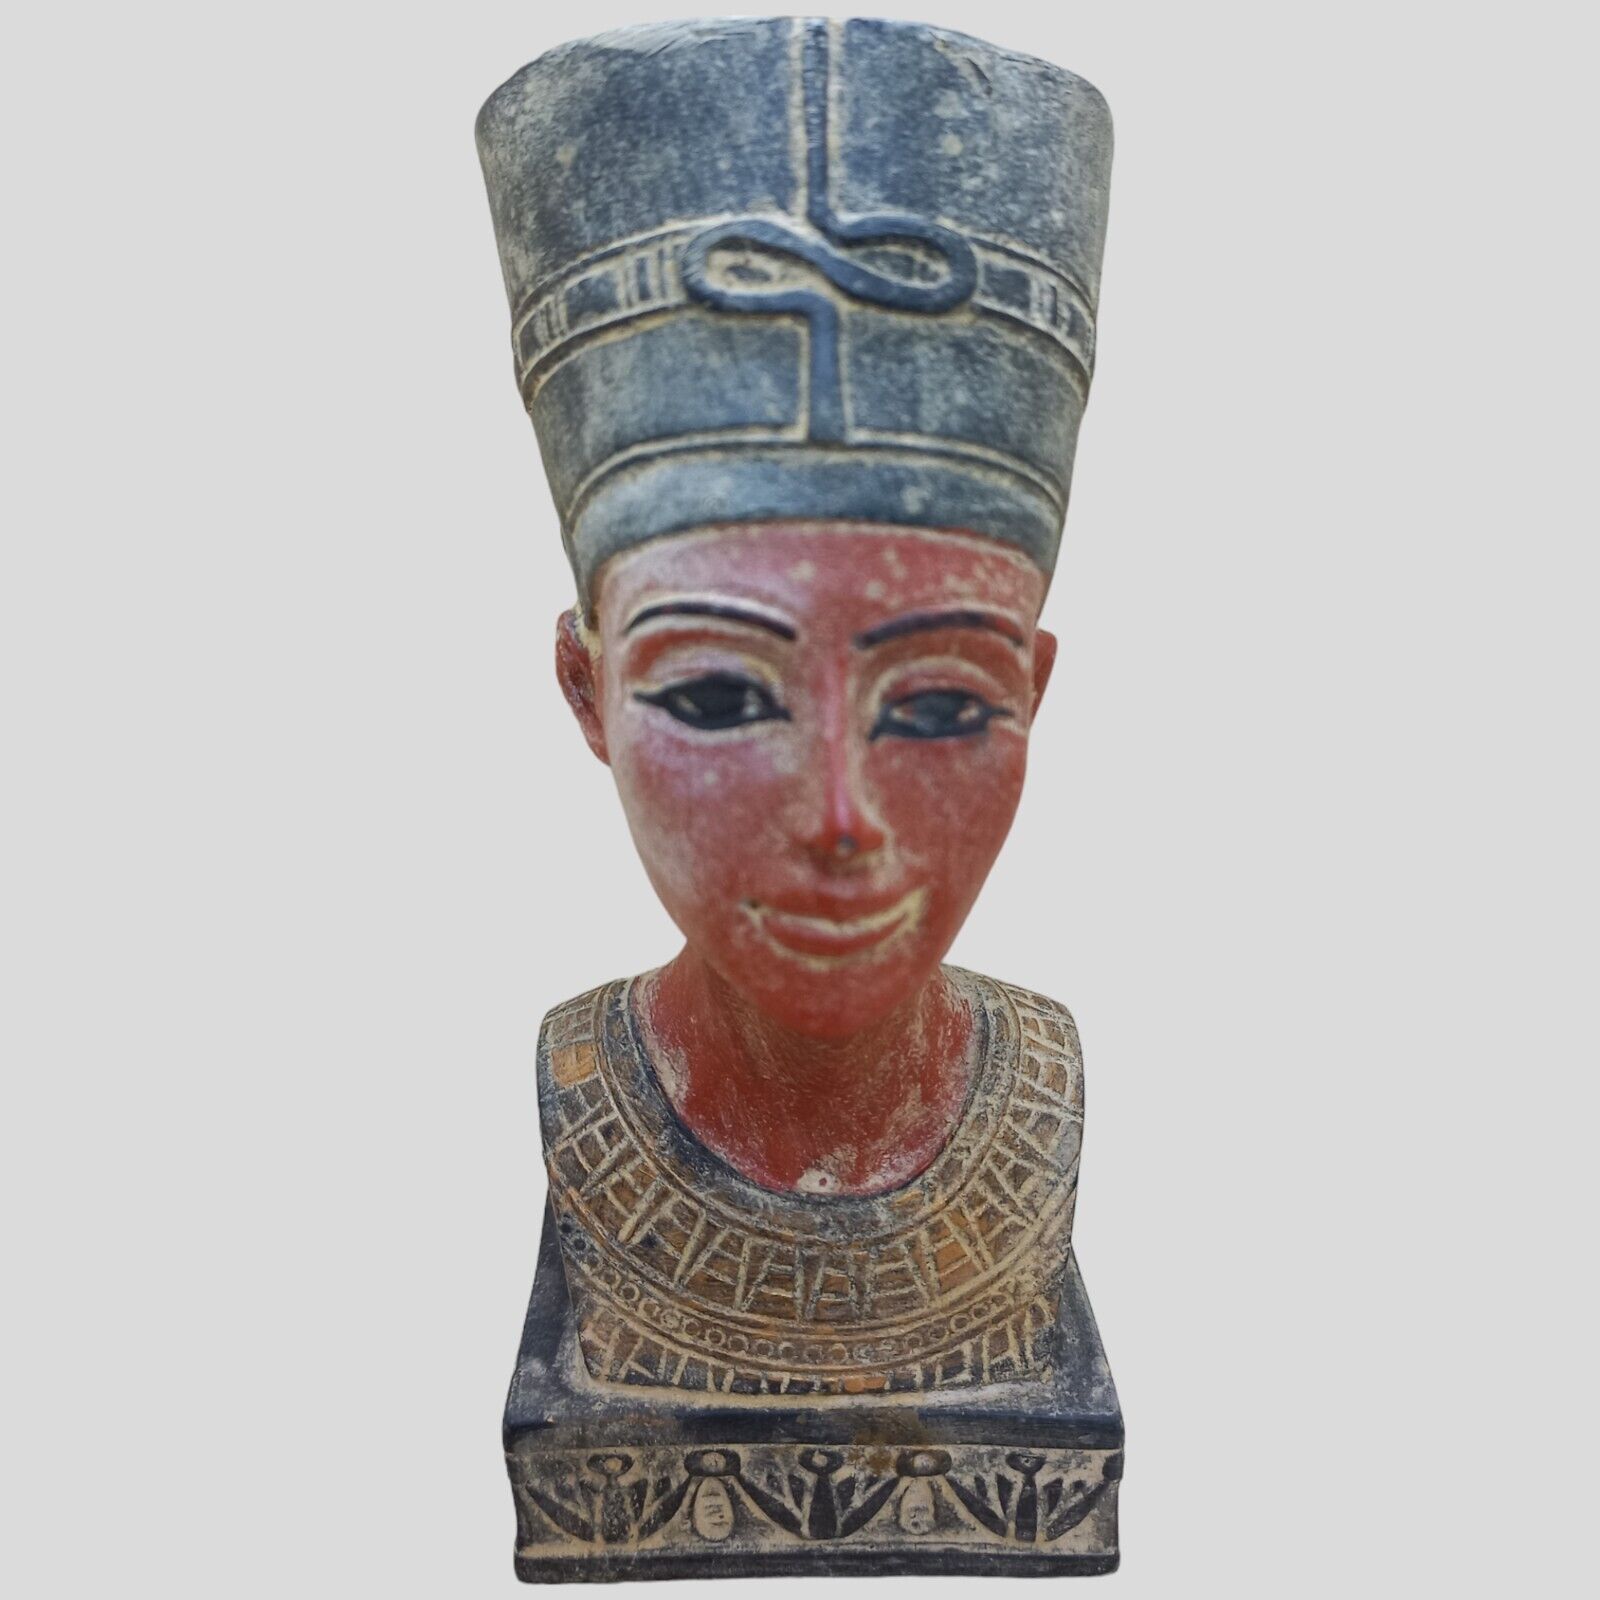 RARE QUEEN NEFERTITI STATUE FROM ANCIENT PHARAONIC EGYPT HISTORY ANTIQUITIES